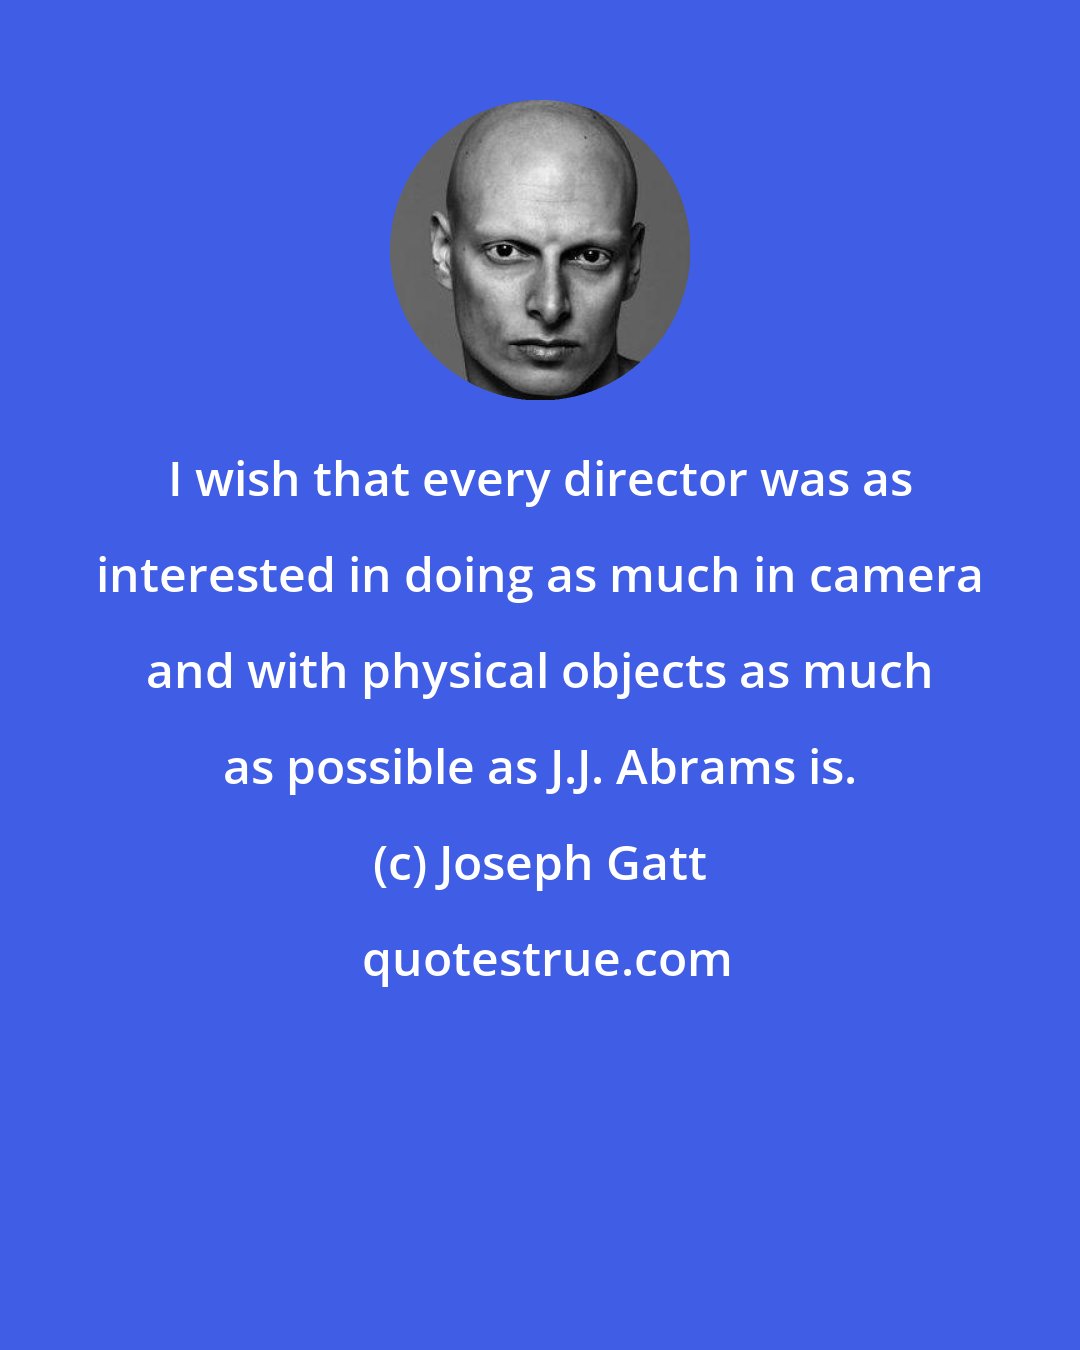 Joseph Gatt: I wish that every director was as interested in doing as much in camera and with physical objects as much as possible as J.J. Abrams is.